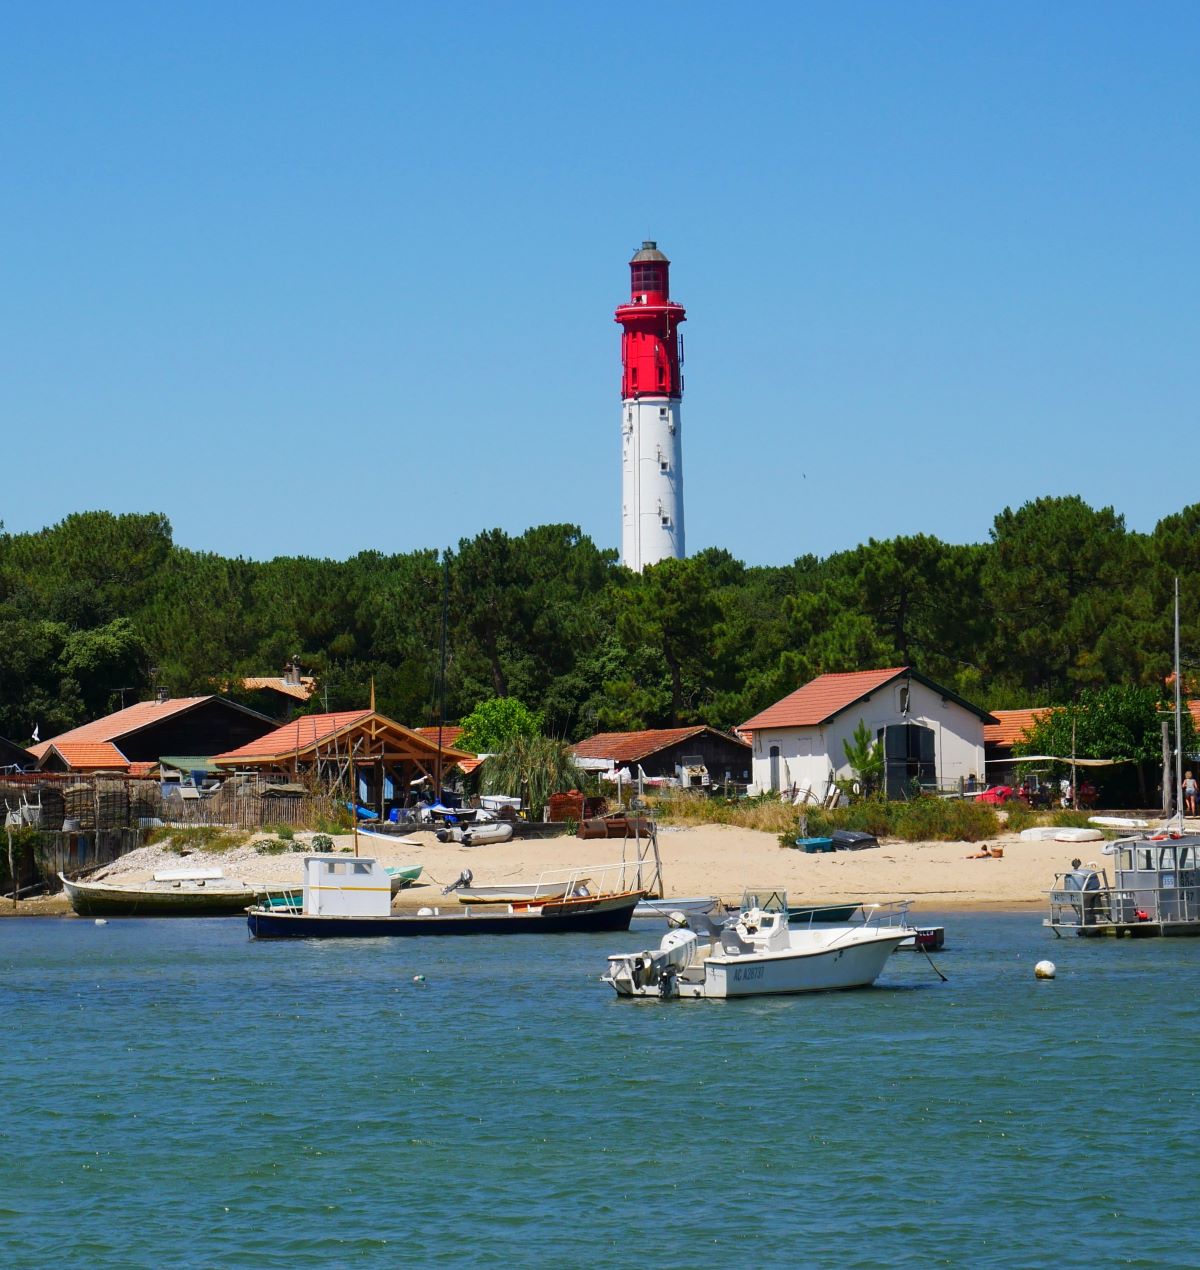 A lighthouse with boats in the foreground